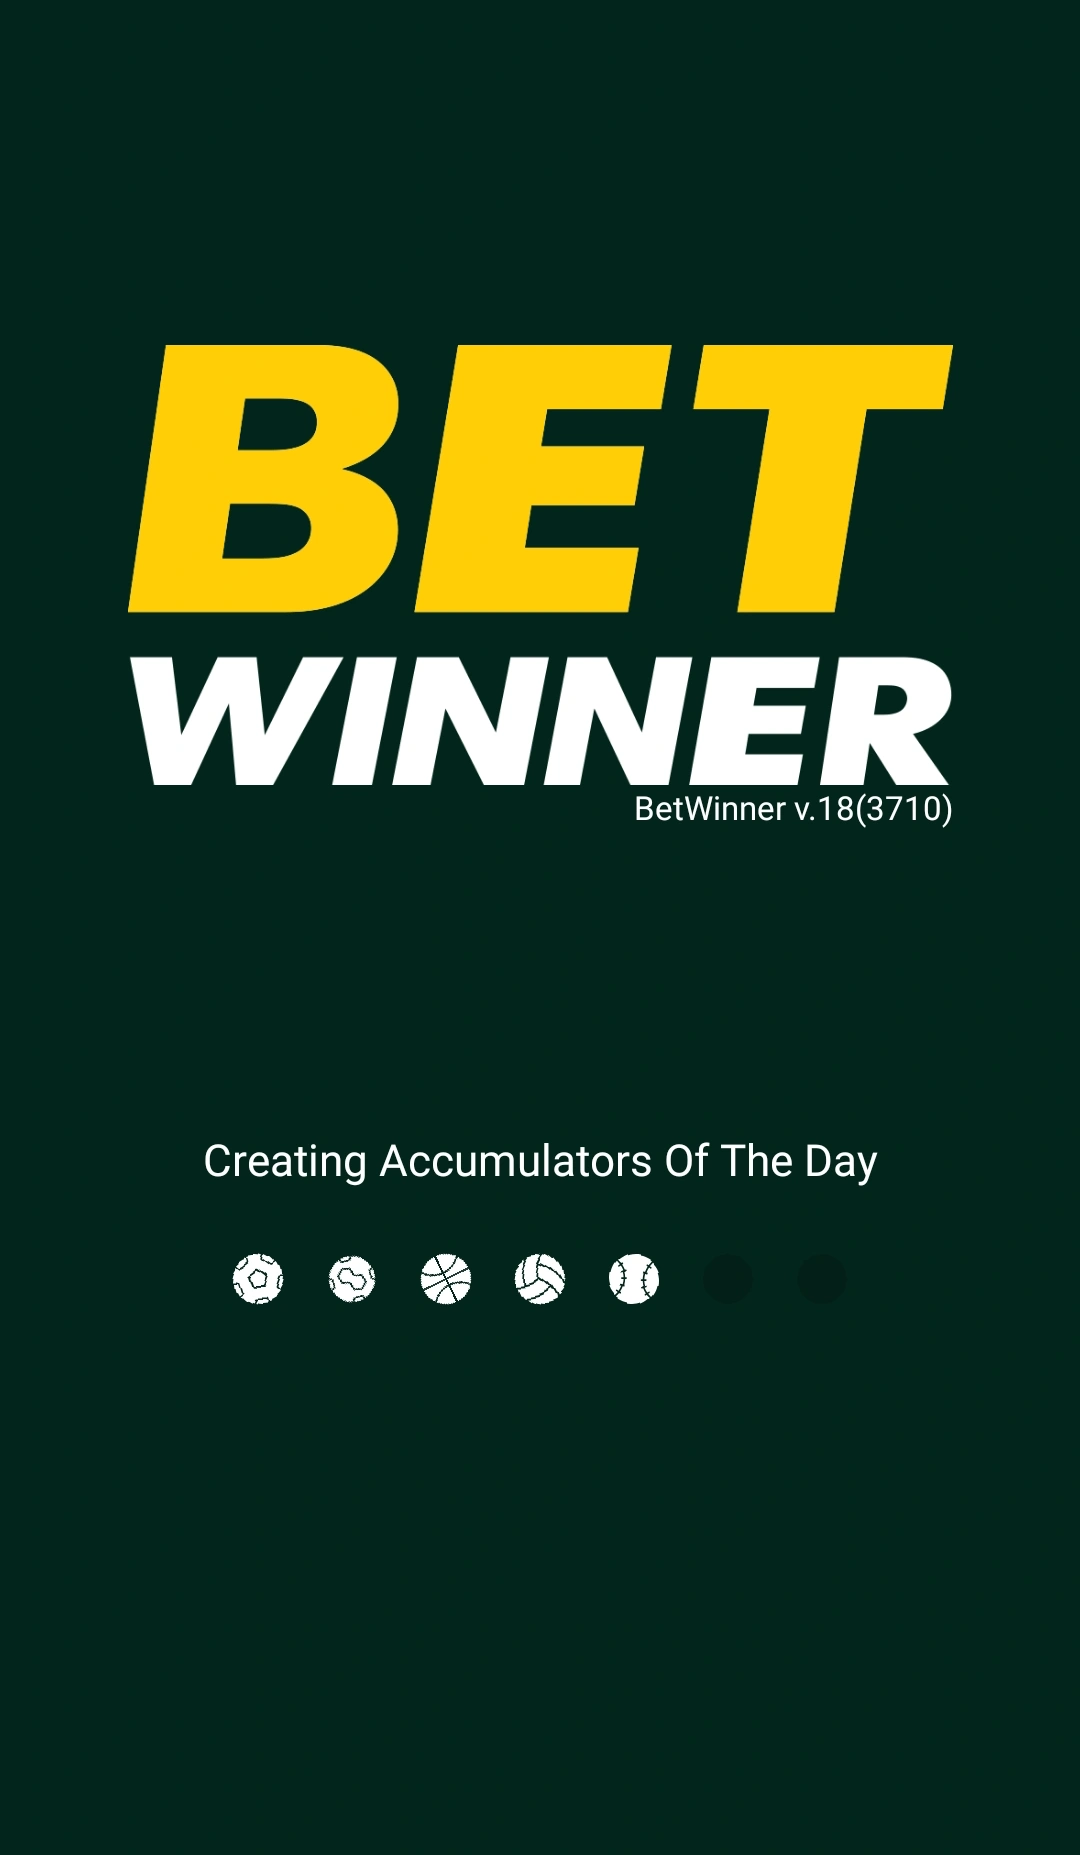 The No. 1 affiliation betwinner Mistake You're Making and 5 Ways To Fix It